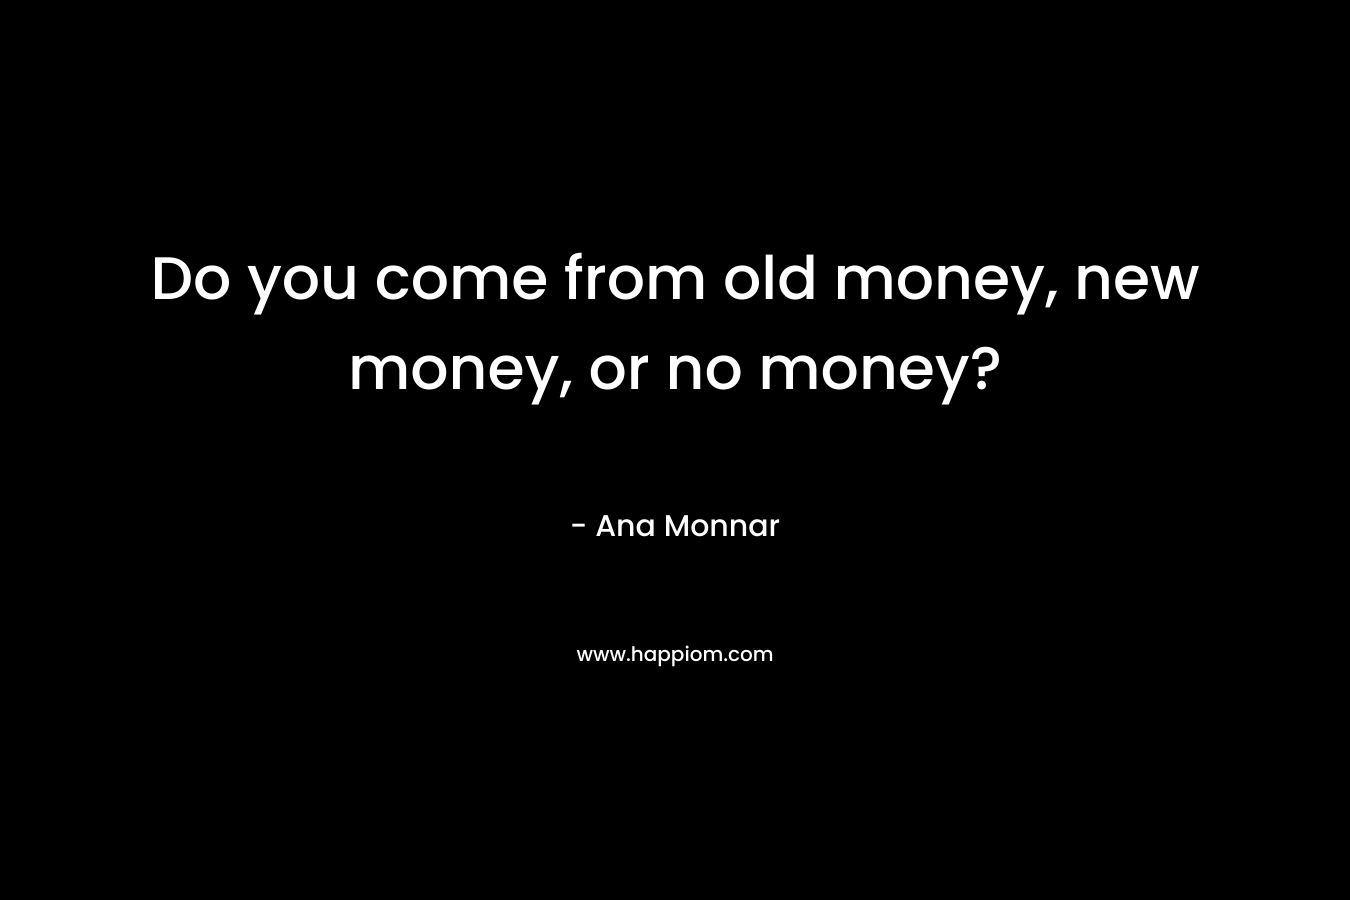 Do you come from old money, new money, or no money?